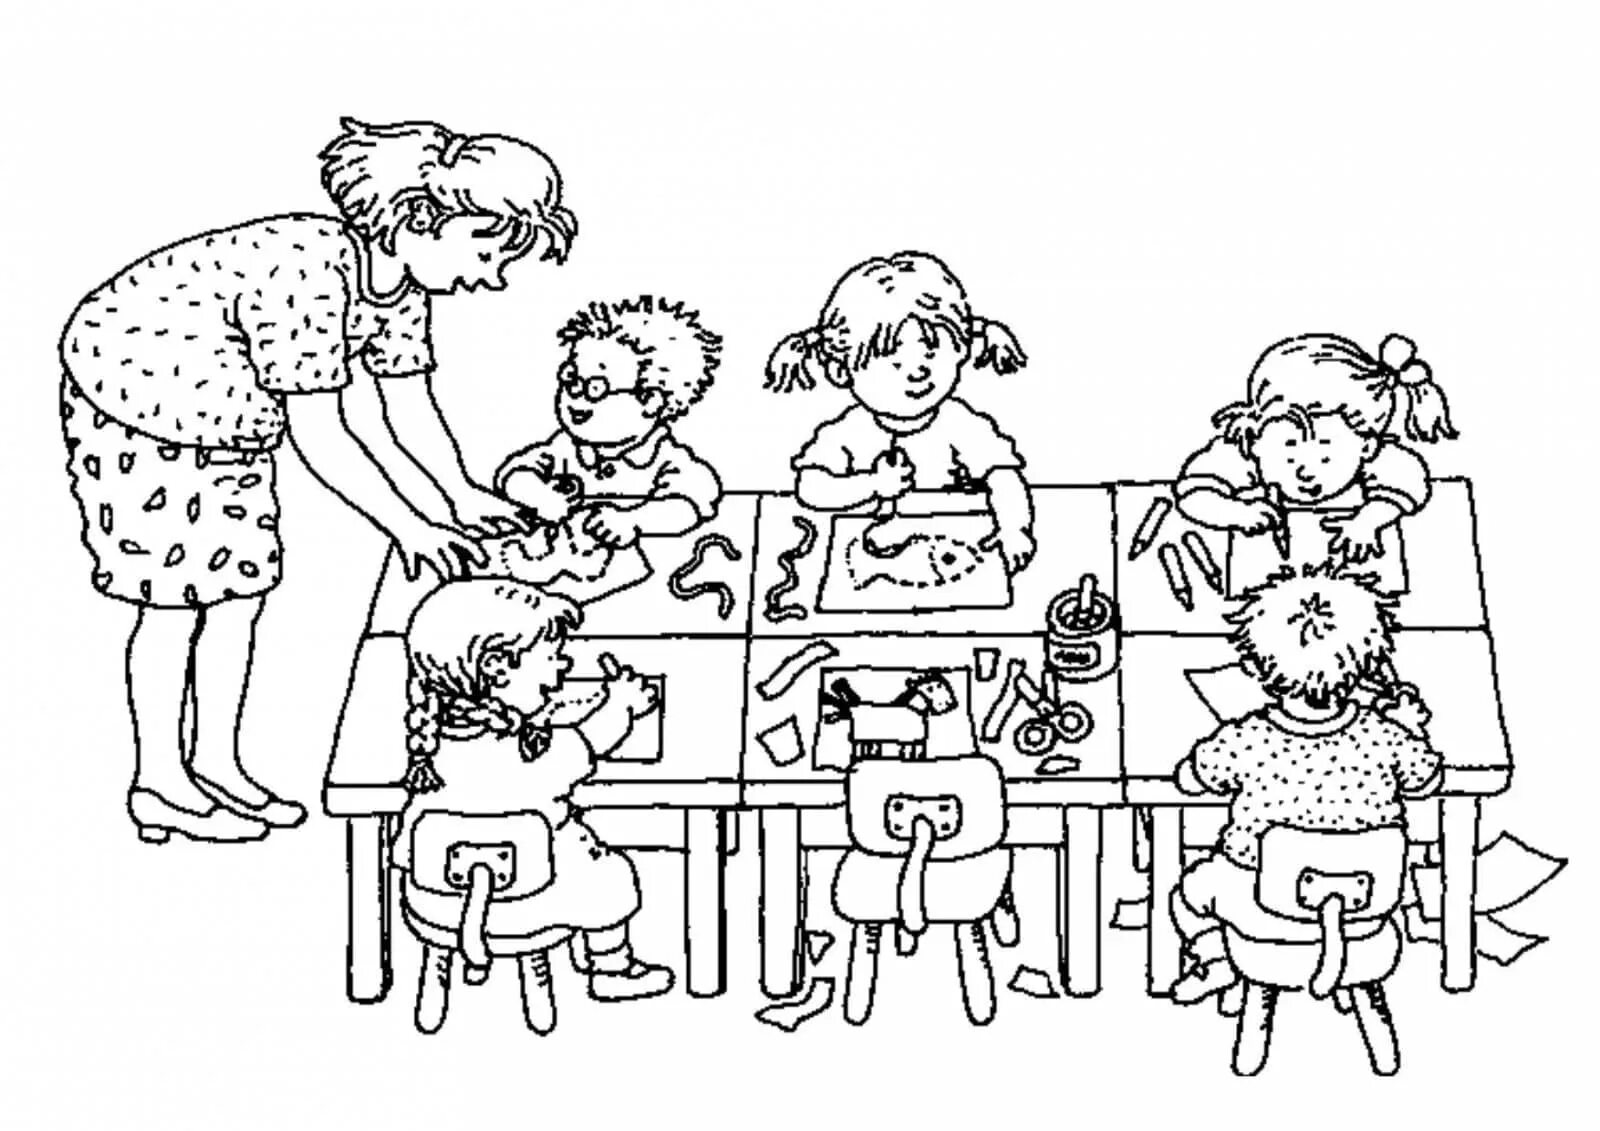 Awesome school cafeteria coloring page